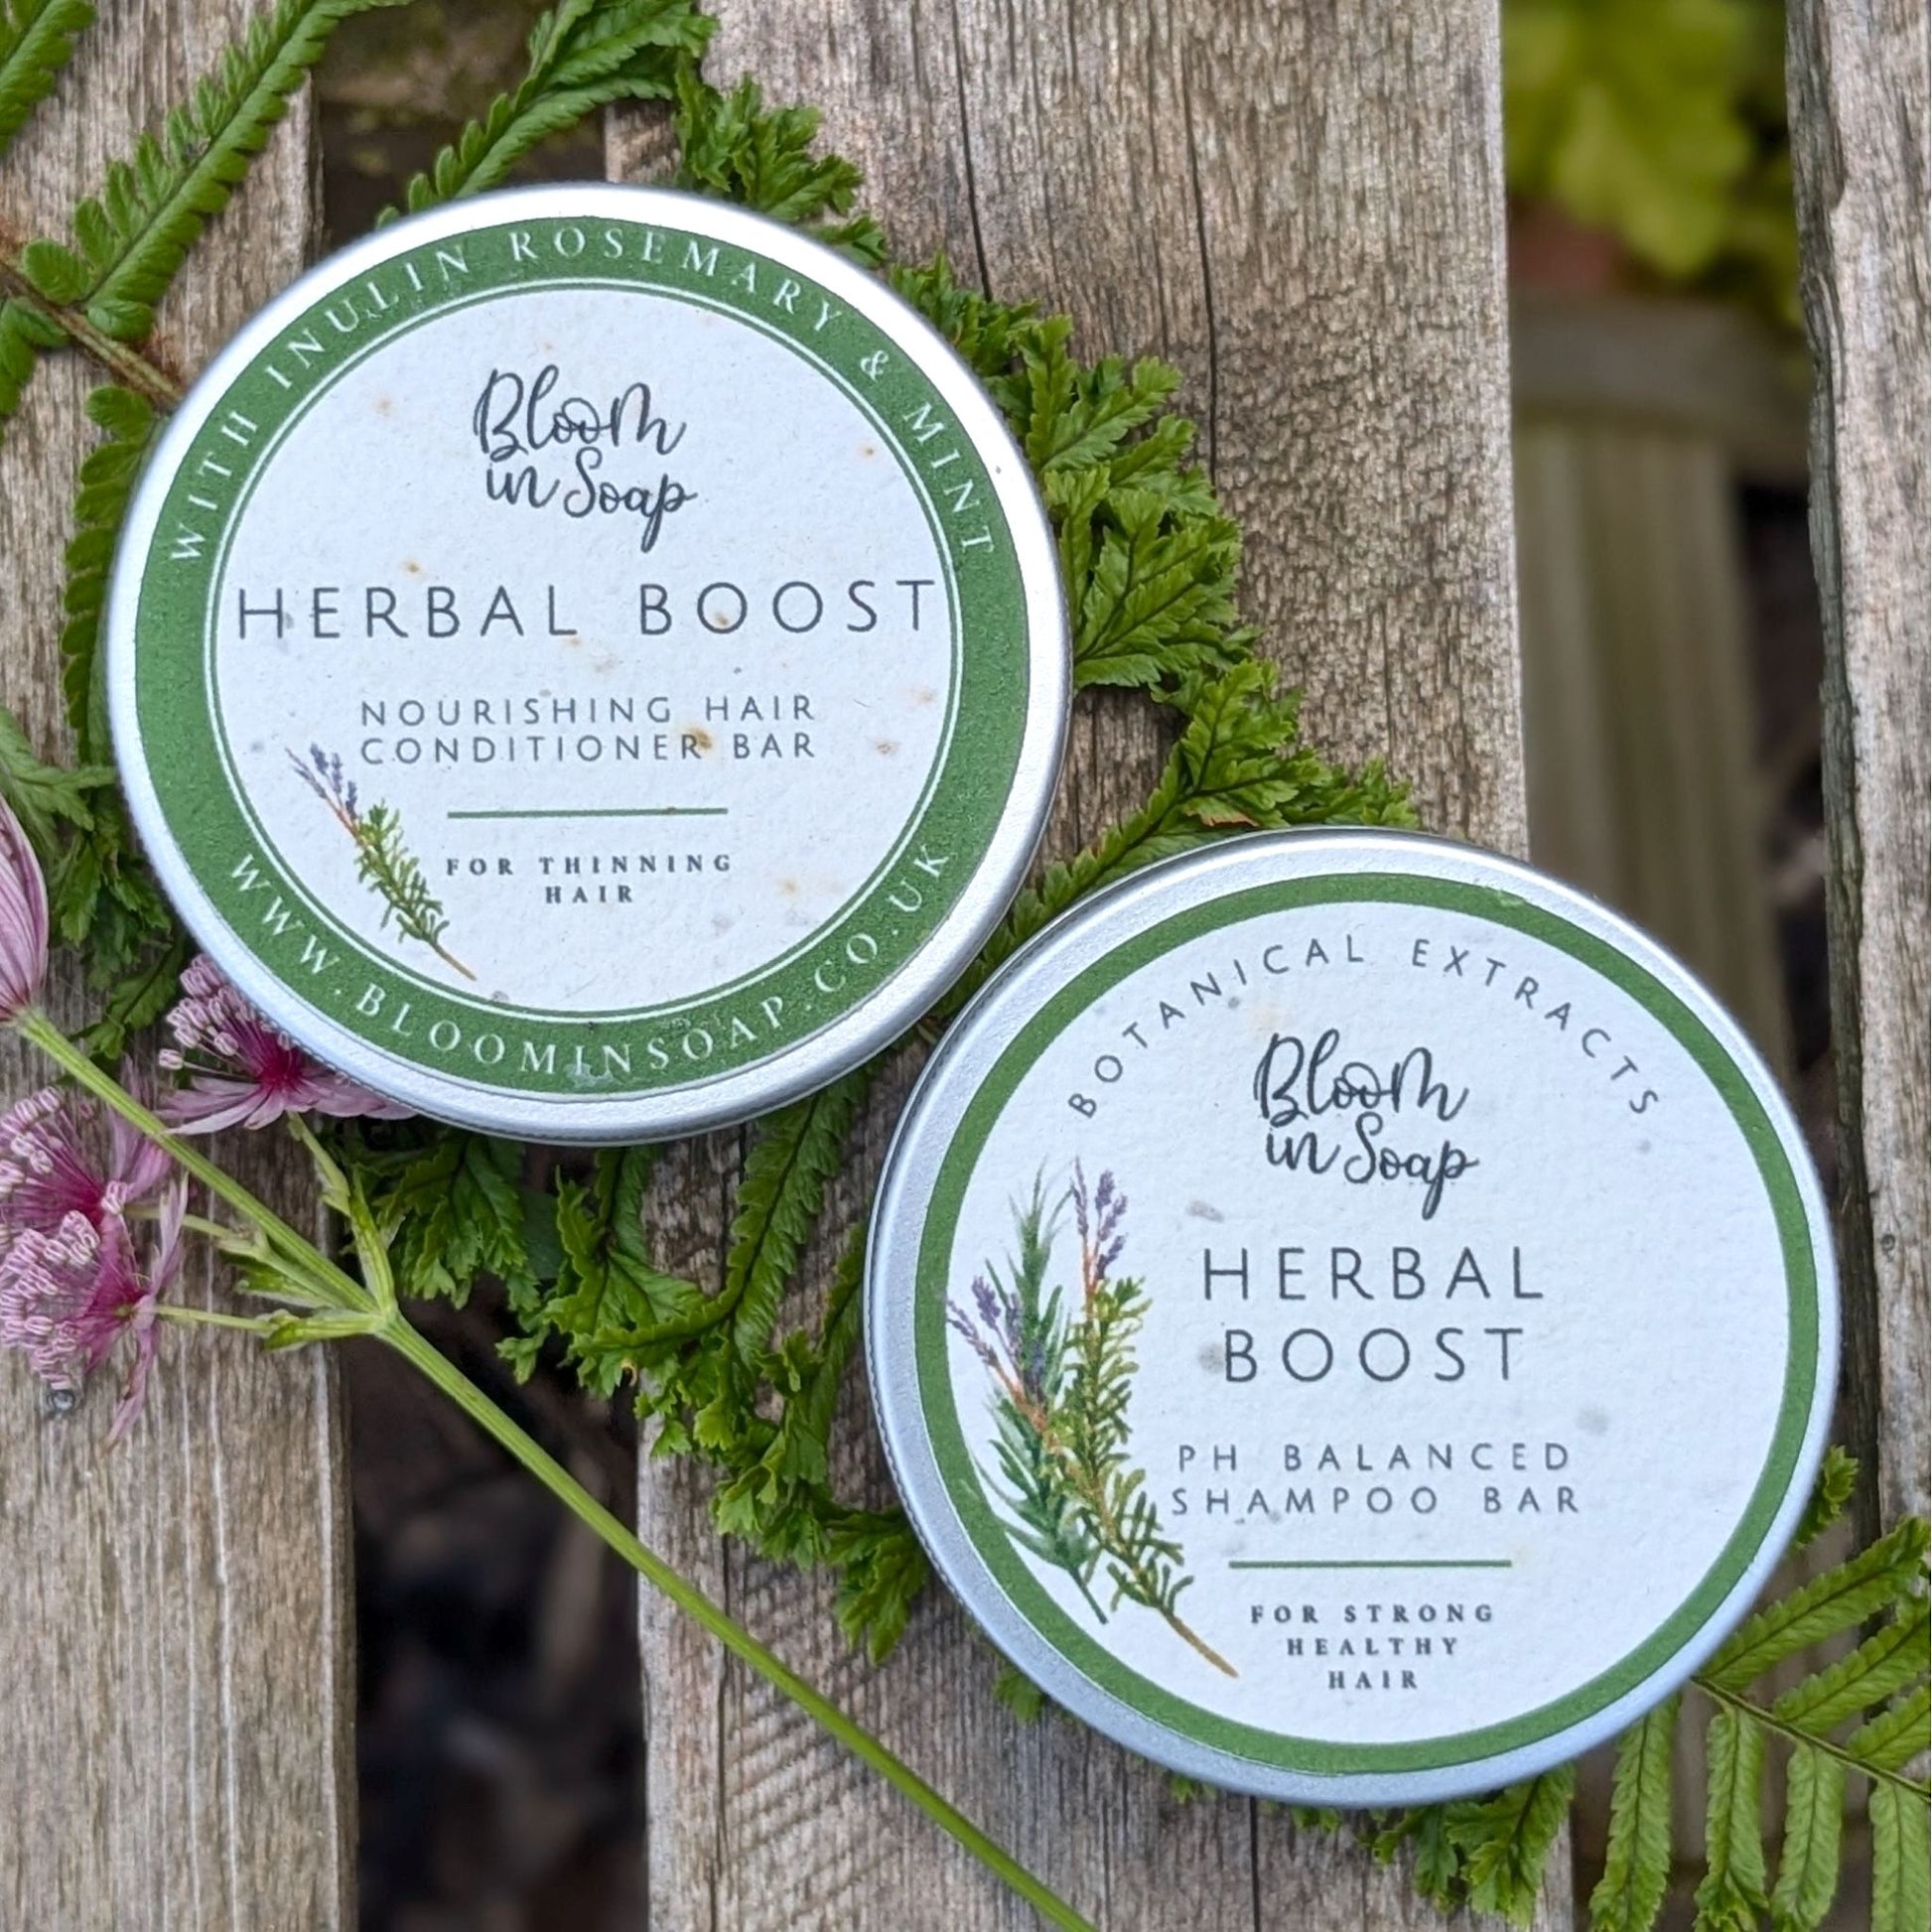 Herbal Boost shampoo and conditioner bars from Bloom In Soap